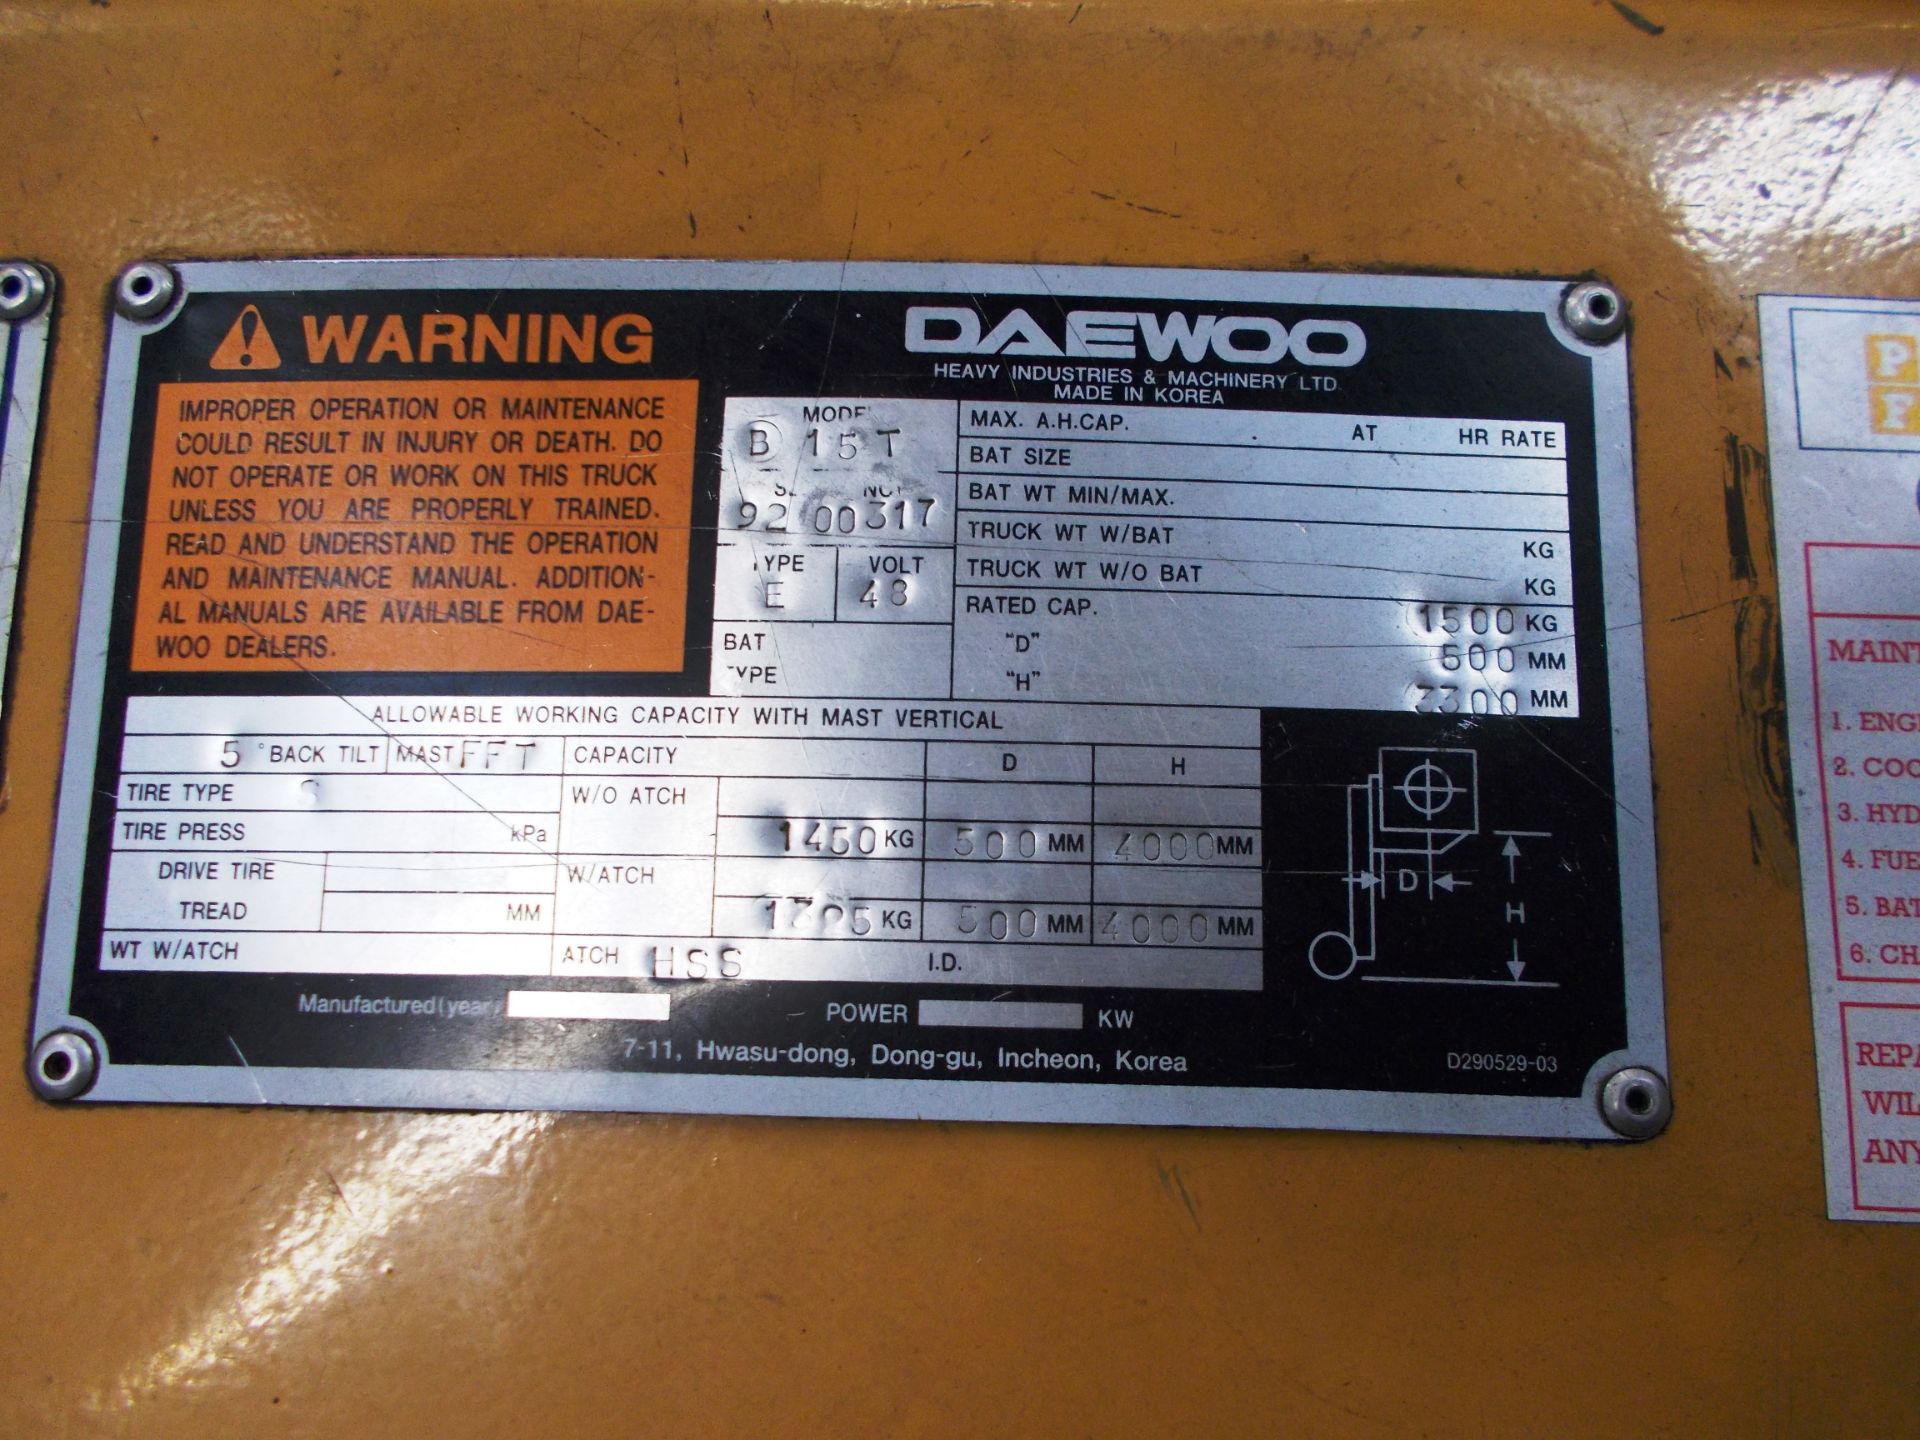 Daewoo D15T Electric Forklift Truck, capacity 1500kg, serial number 9200317 with side shift and - Image 5 of 8